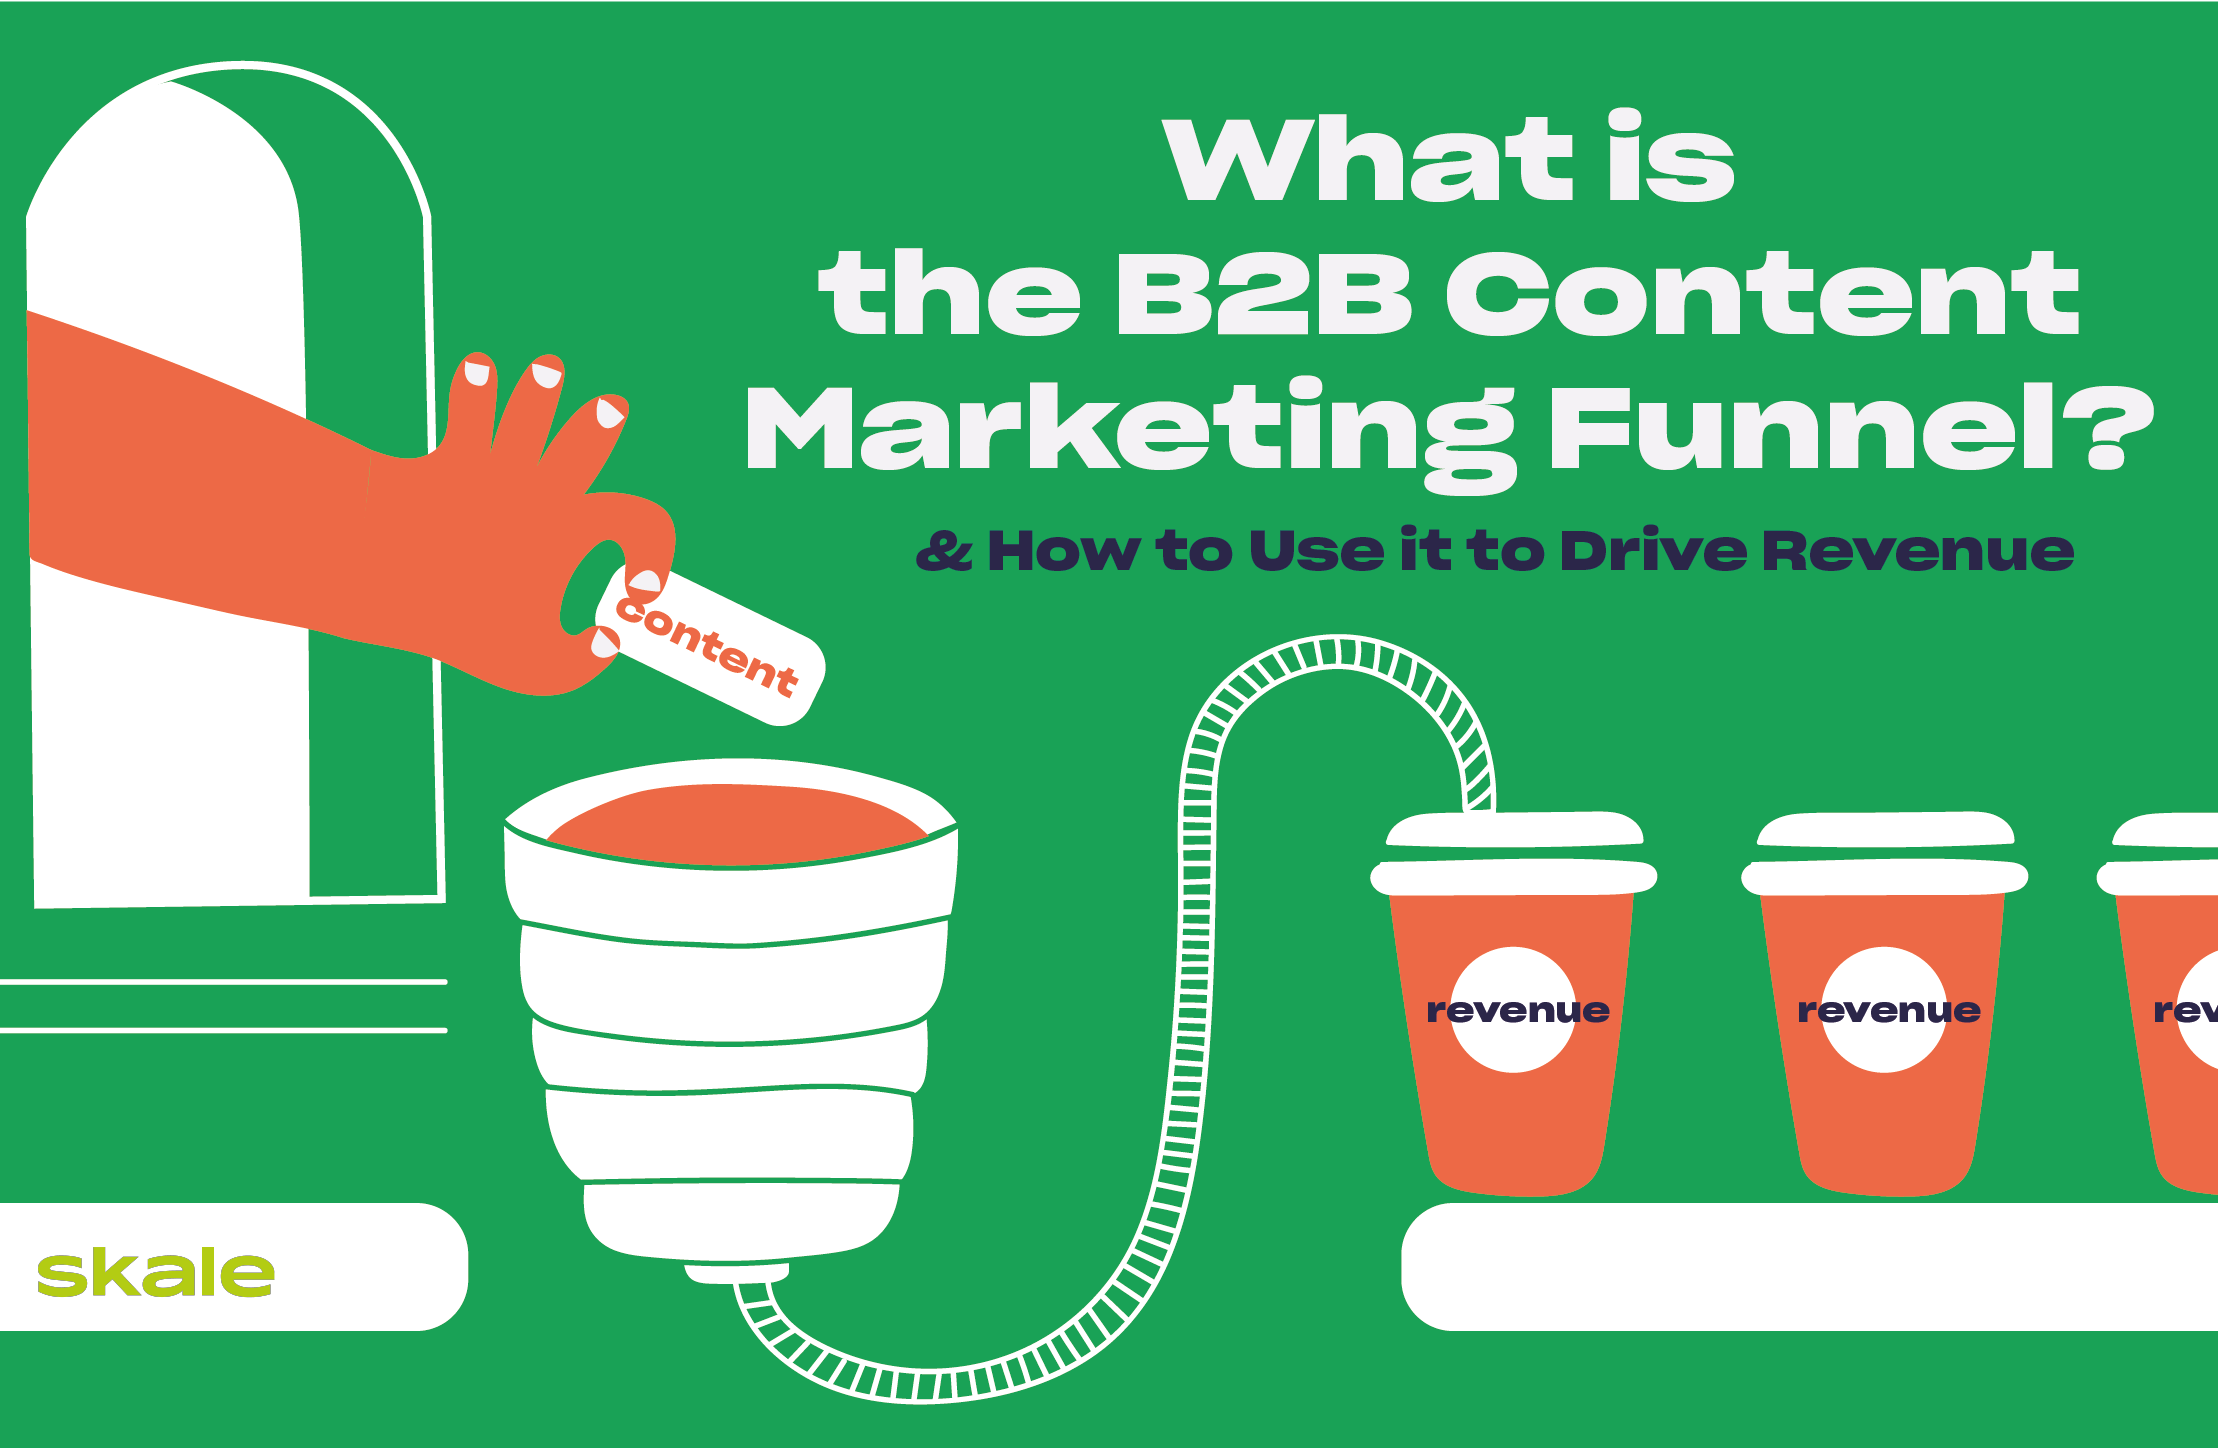 What is the B2B Content Marketing Funnel? (& How to Use it to Drive Revenue)